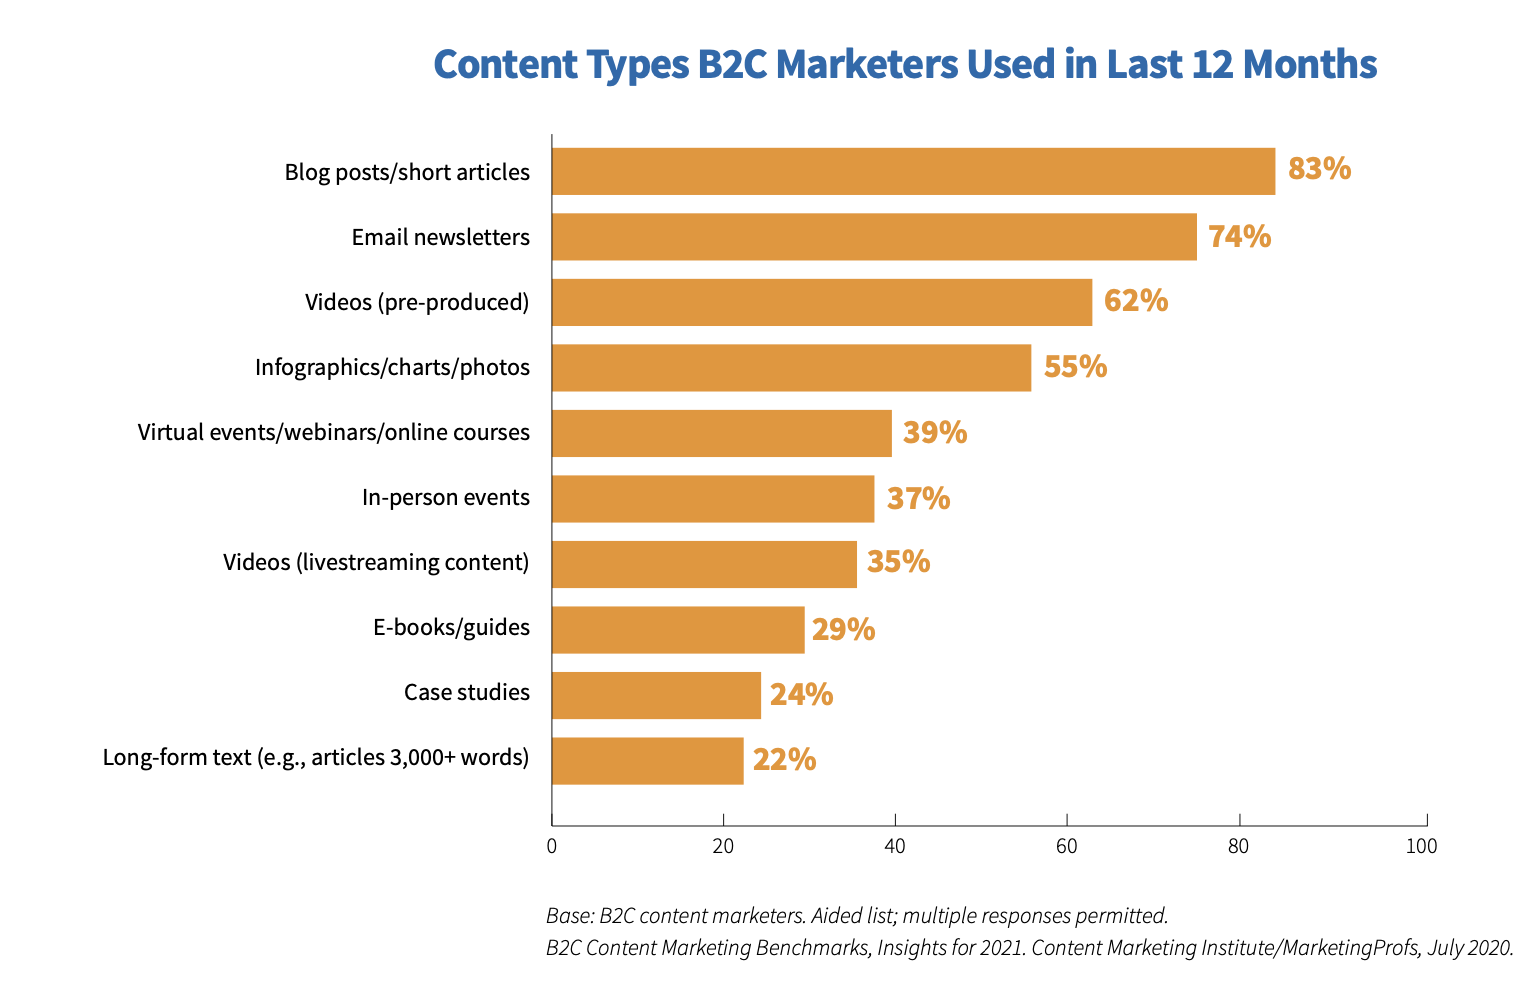 Content Types B2C Marketers Use